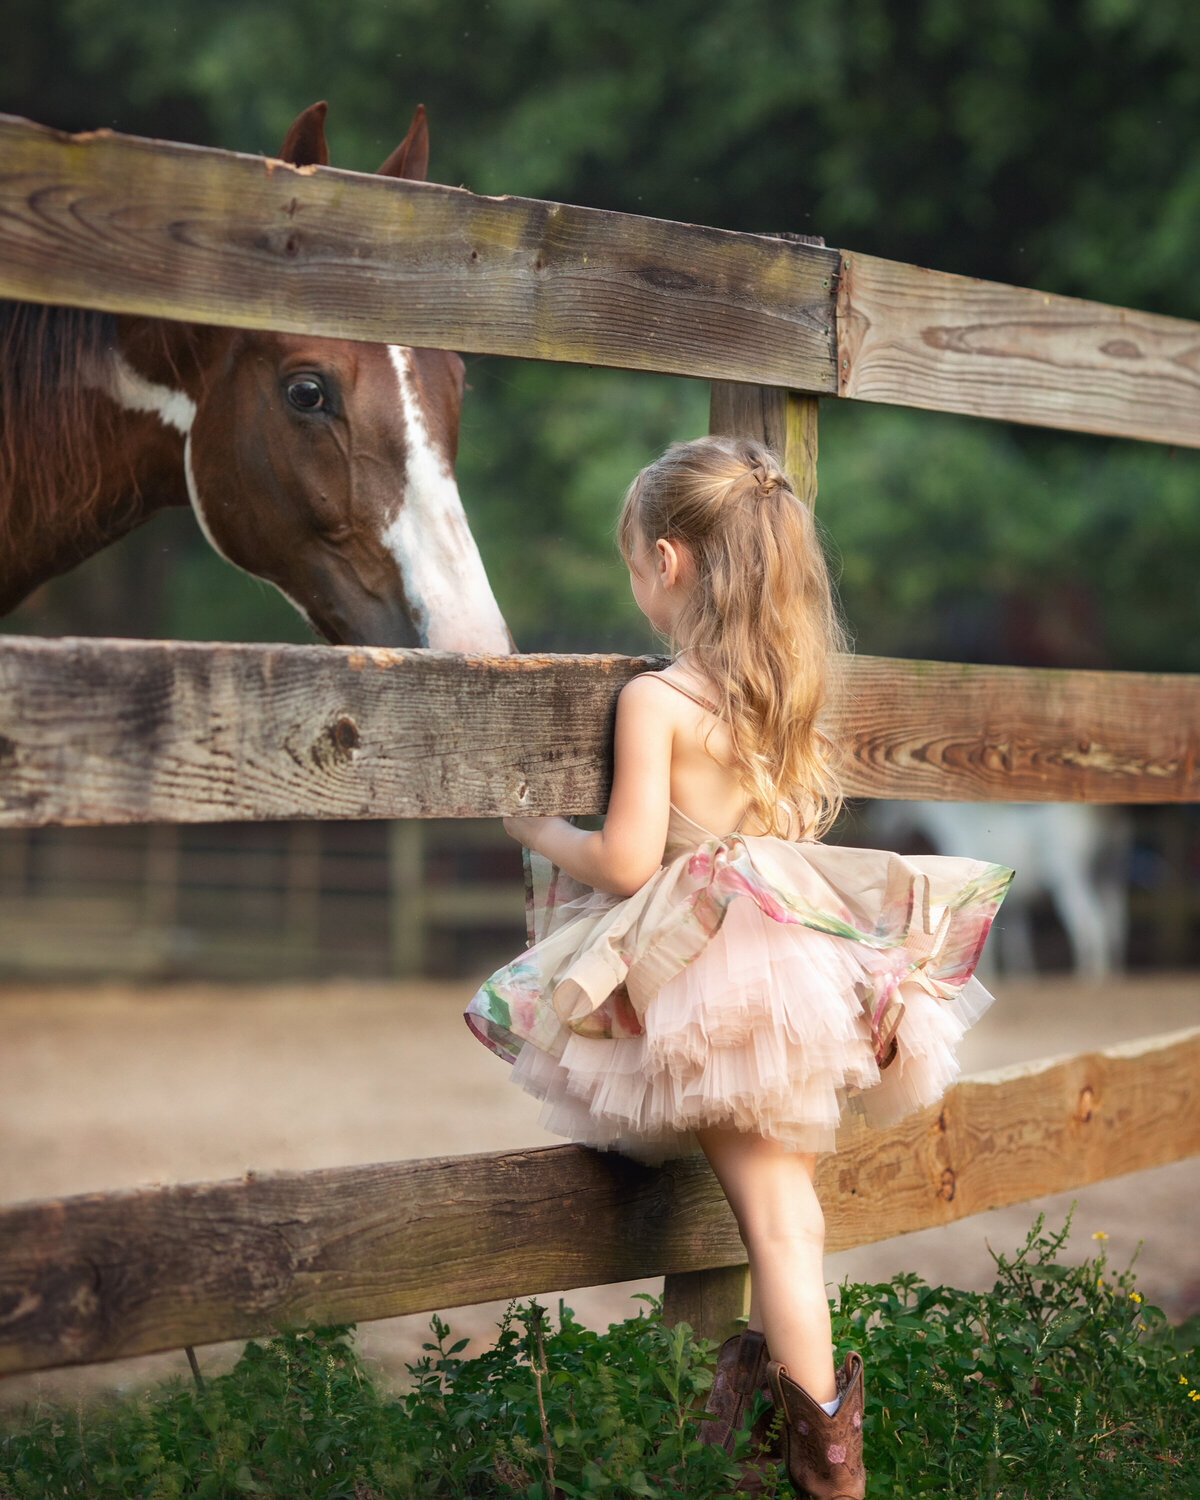 Paint horse with his ears forward on one side of a wooden fence.  On the other side of the fence, a young girl has her back to the camera and is wearing cowboy boots and a rose colored tutu.